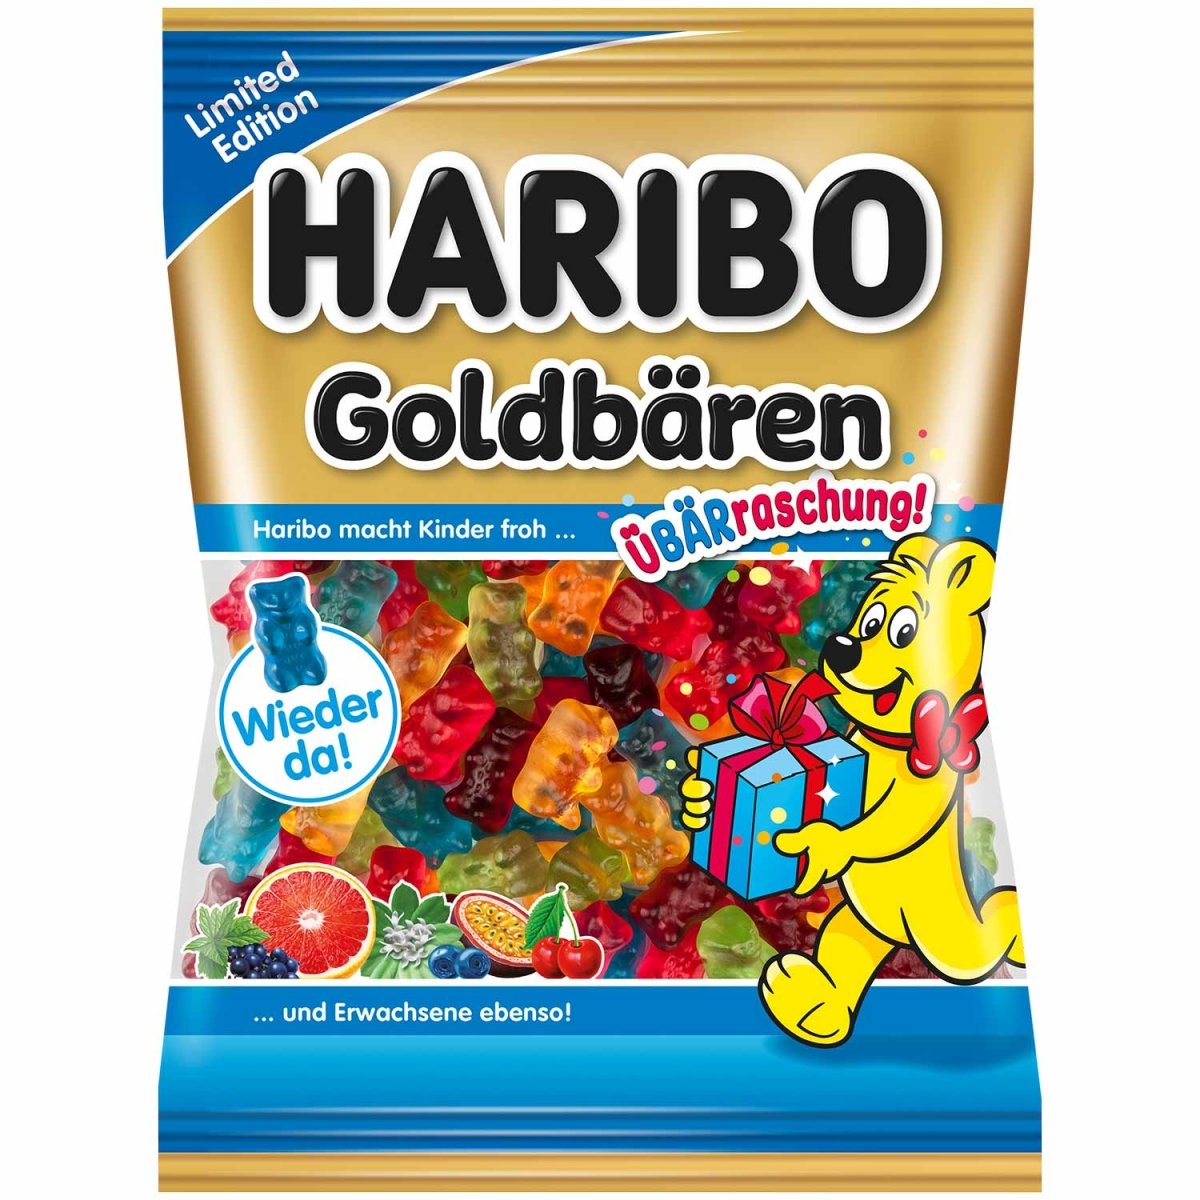 Haribo Gold Bears Surprise 100th Anniversary Edition (Germany